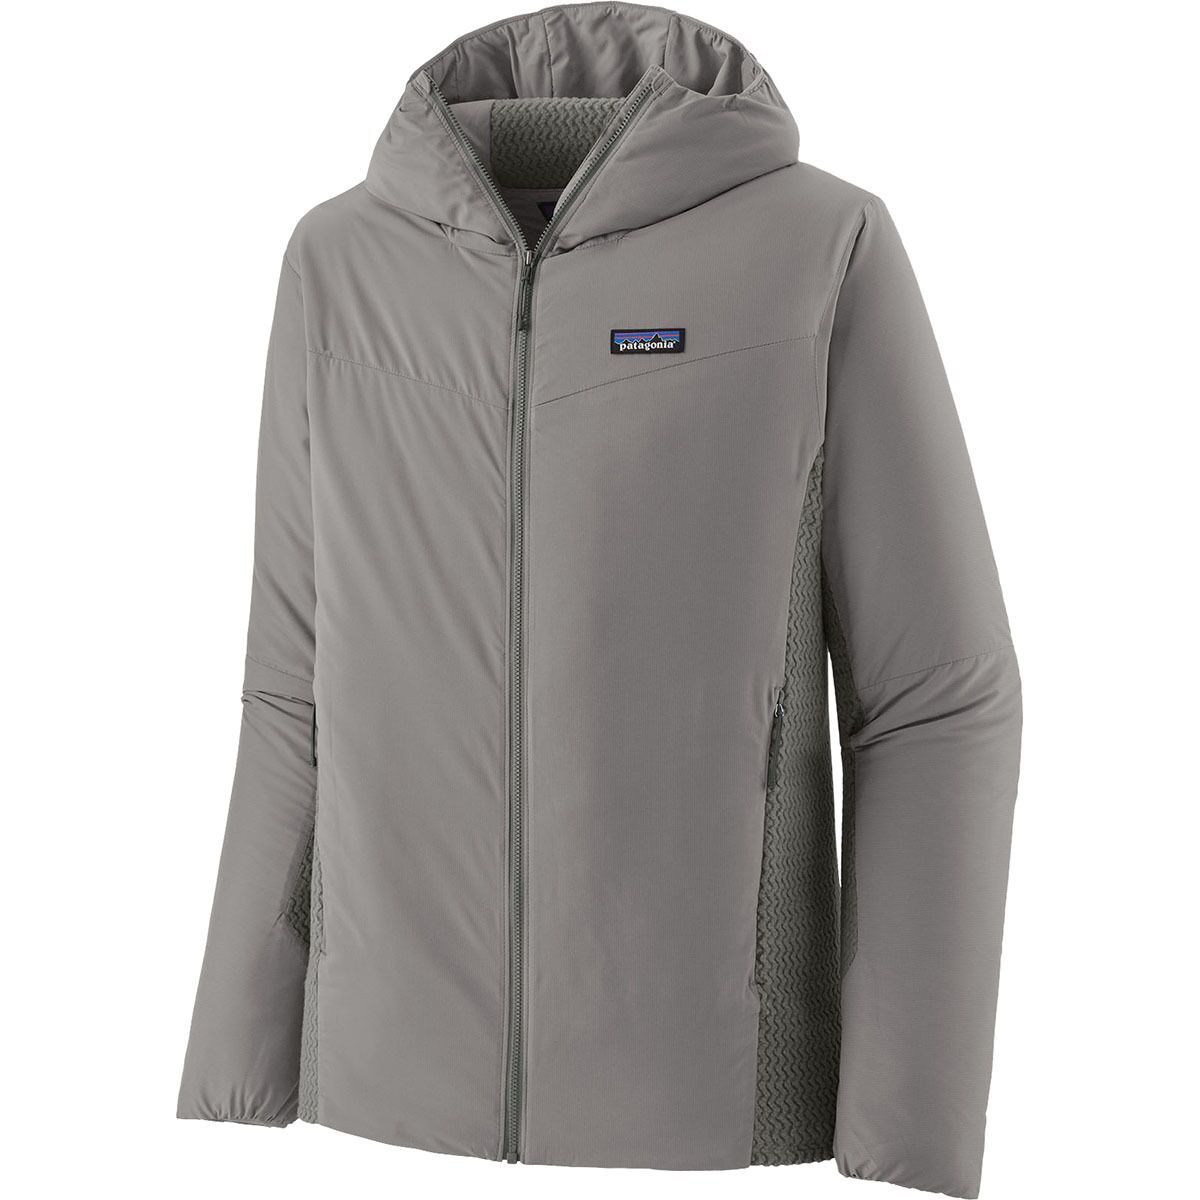 Patagonia Nano-Air Light Hybrid Insulated Hooded Jacket - Men's